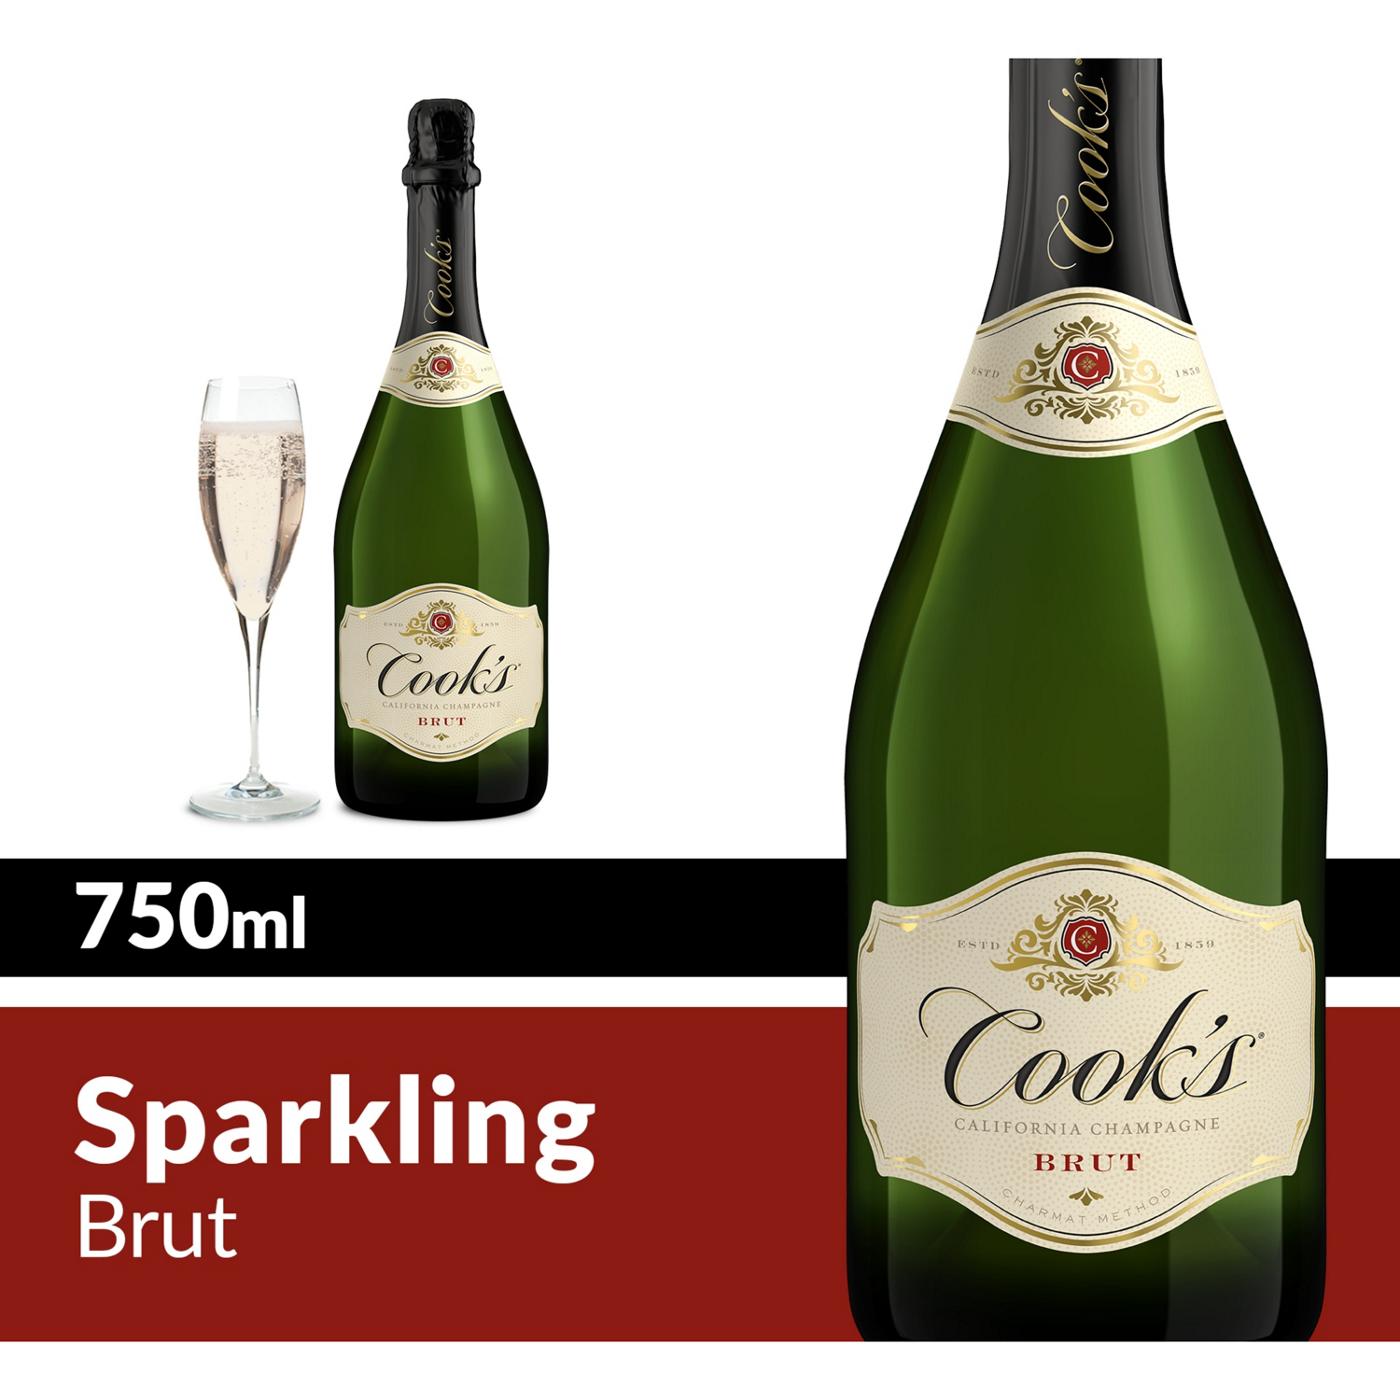 Cook's Brut California Champagne Sparkling Wine; image 5 of 6